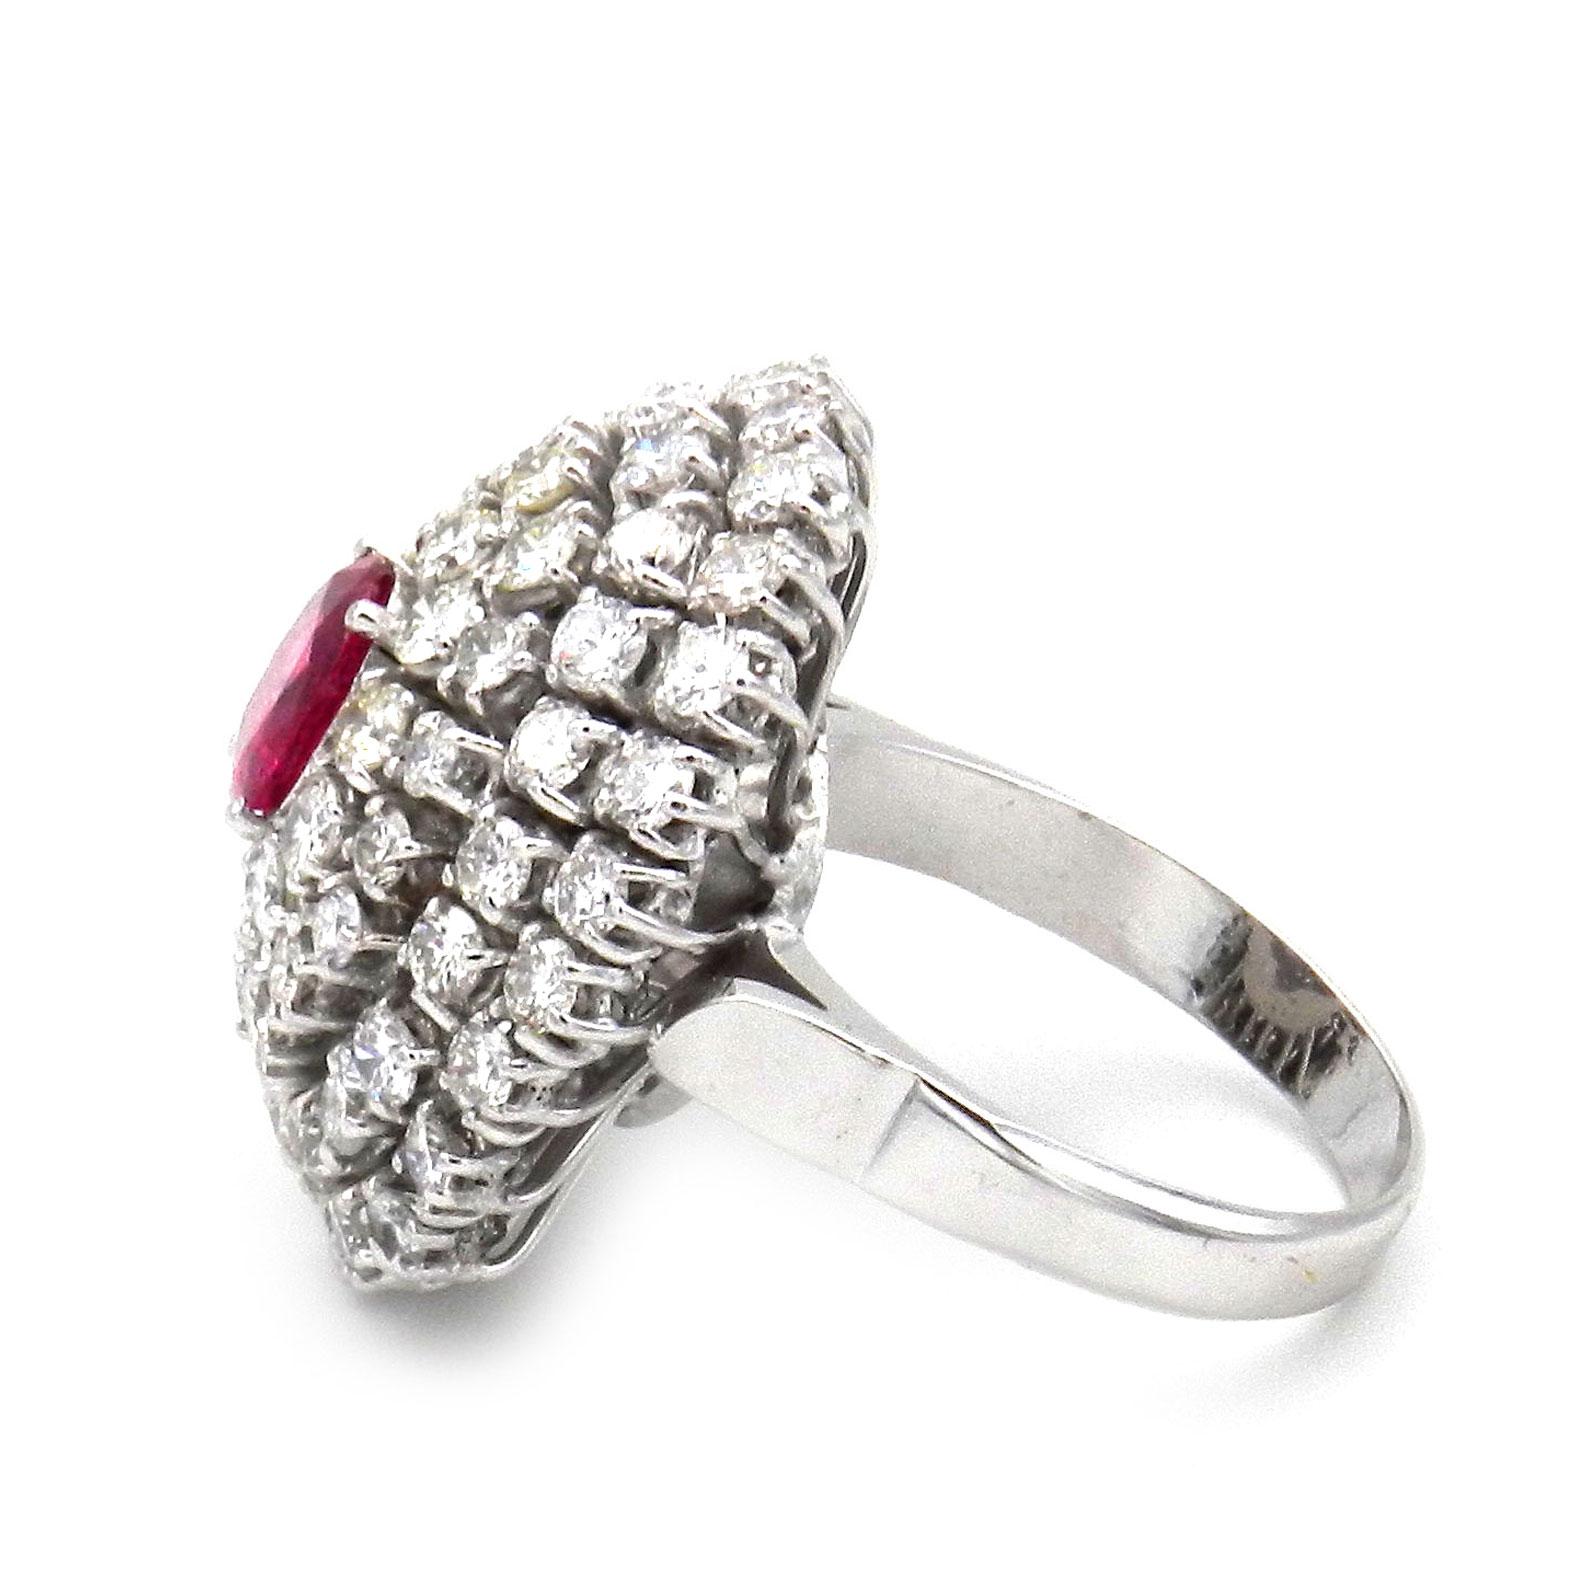 Brilliant Cut Natural Ruby and 4 Carat Diamond Cocktail Ring in 18 Karat White Gold